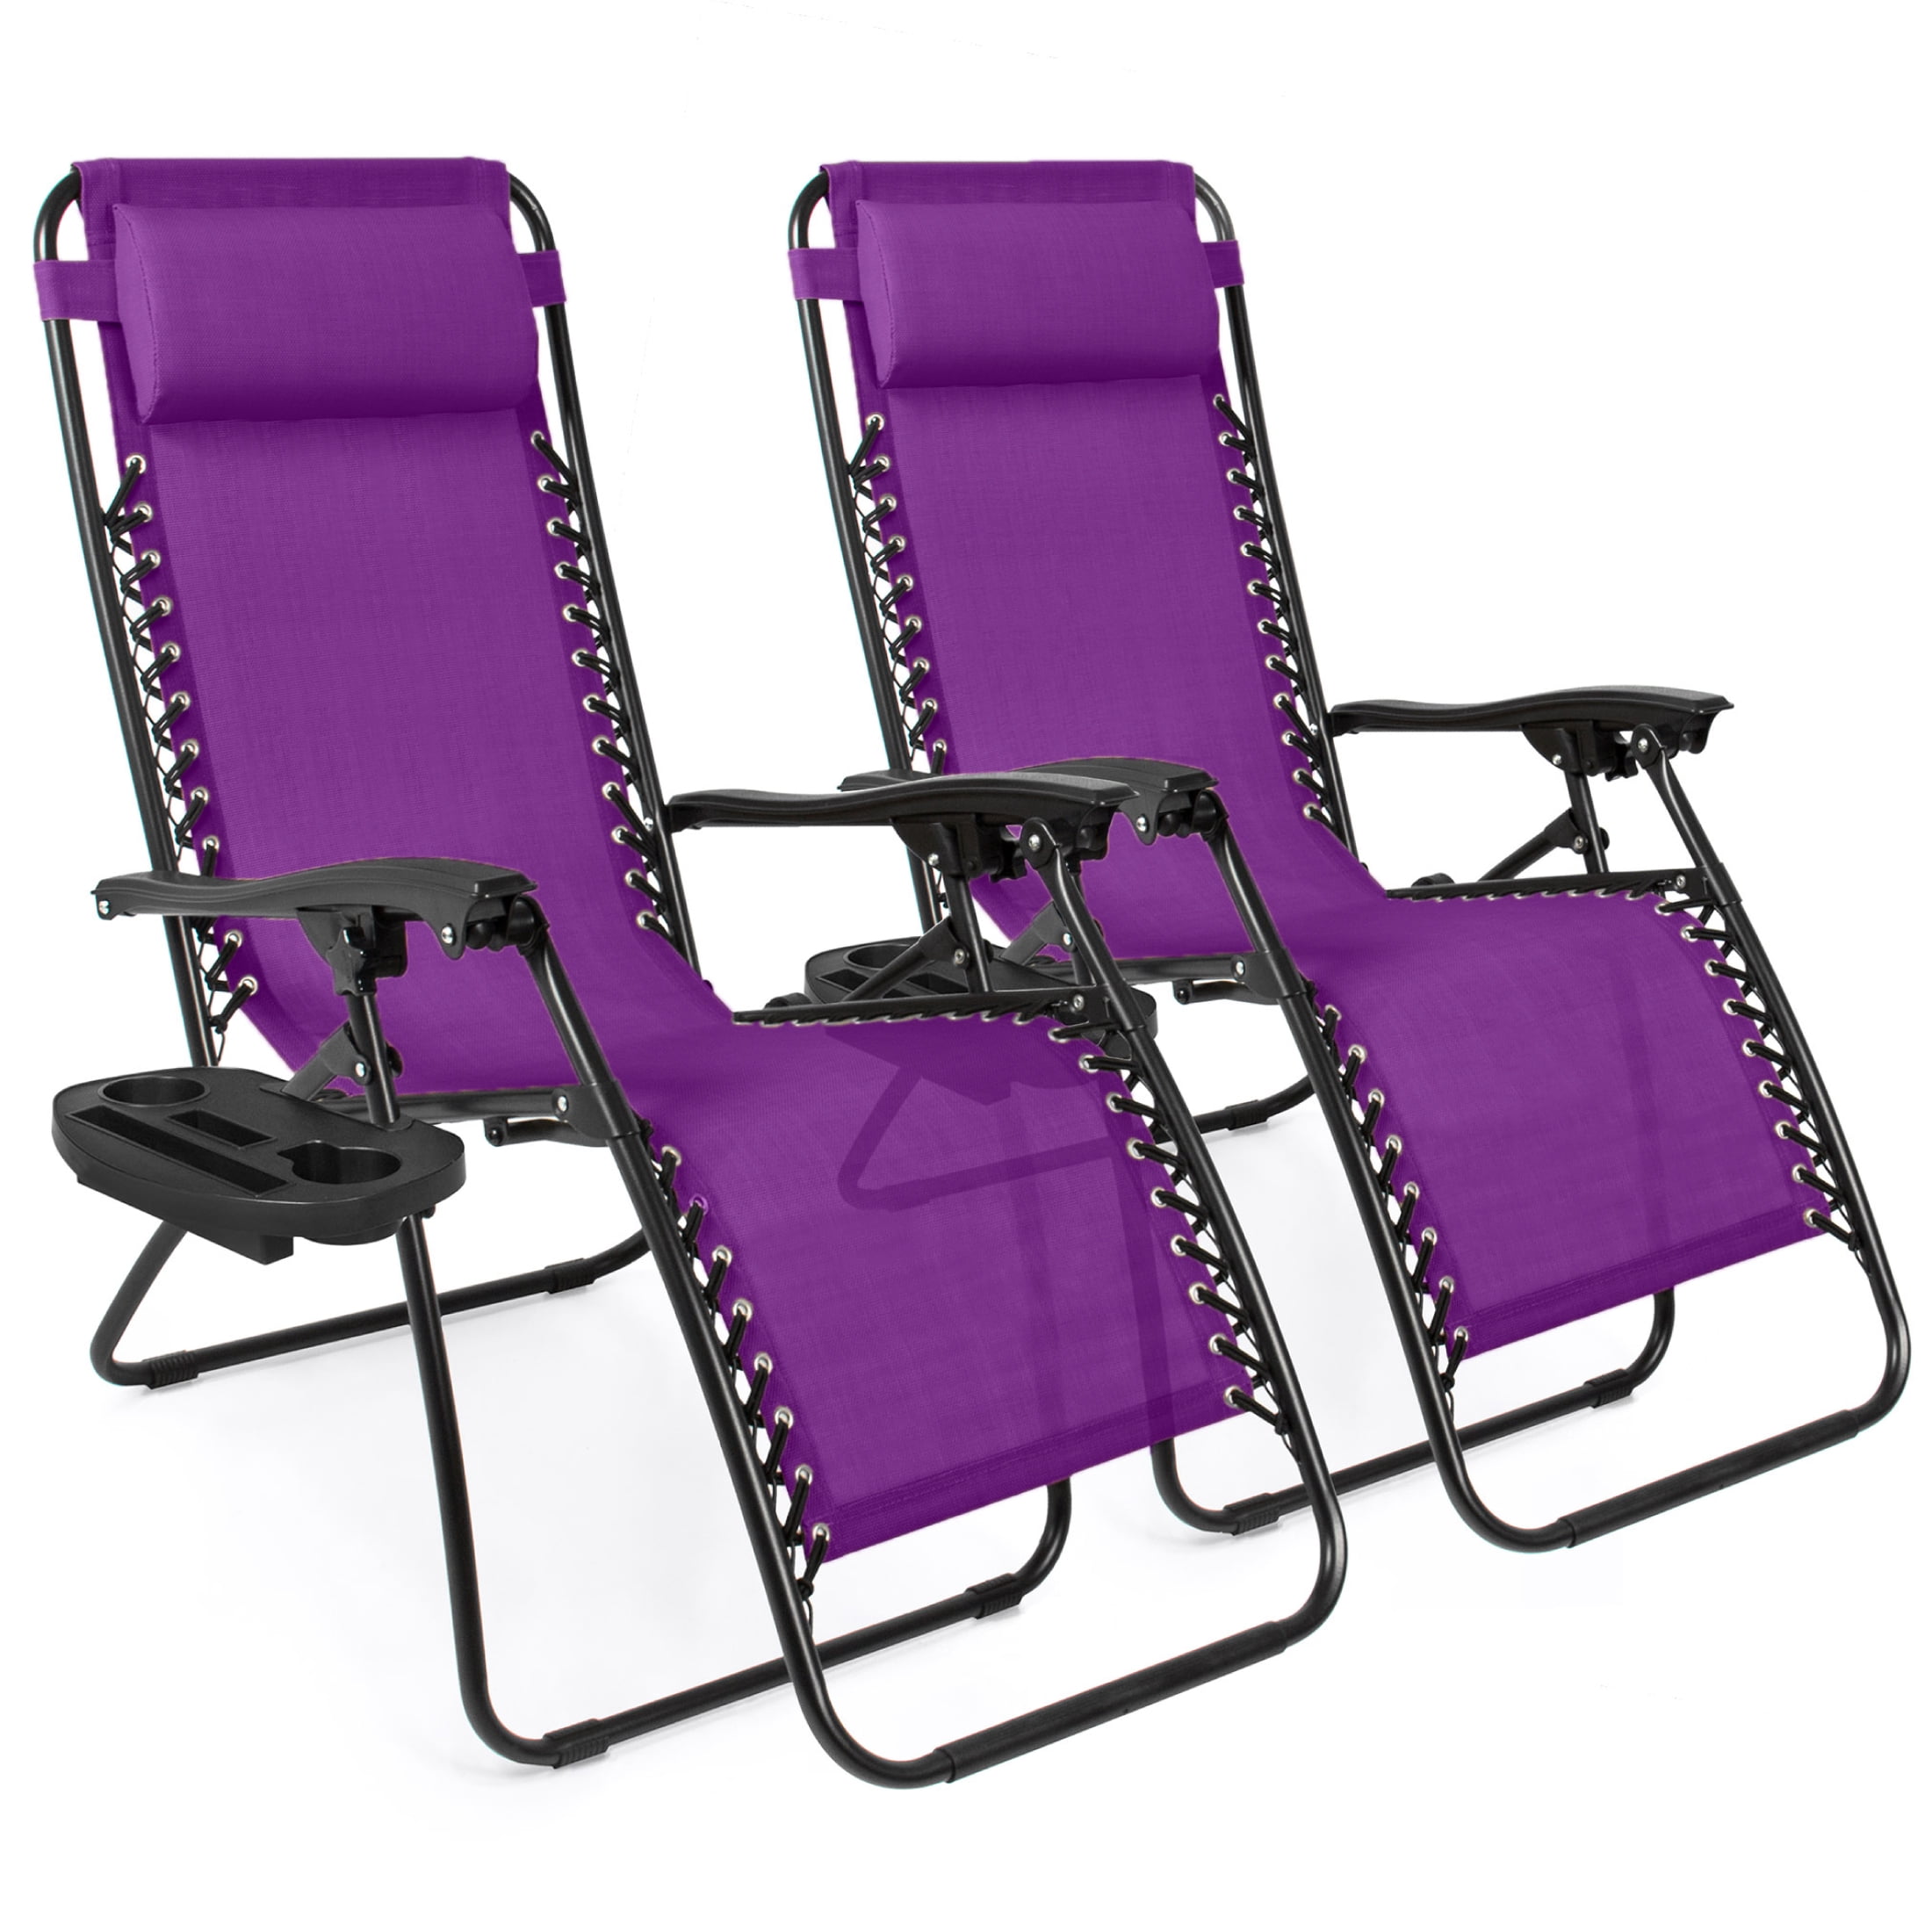 Best Choice Products Set of 2 Zero Gravity Lounge Chair Recliners for Patio, Pool w/ Cup Holder Tray - Amethyst Purple